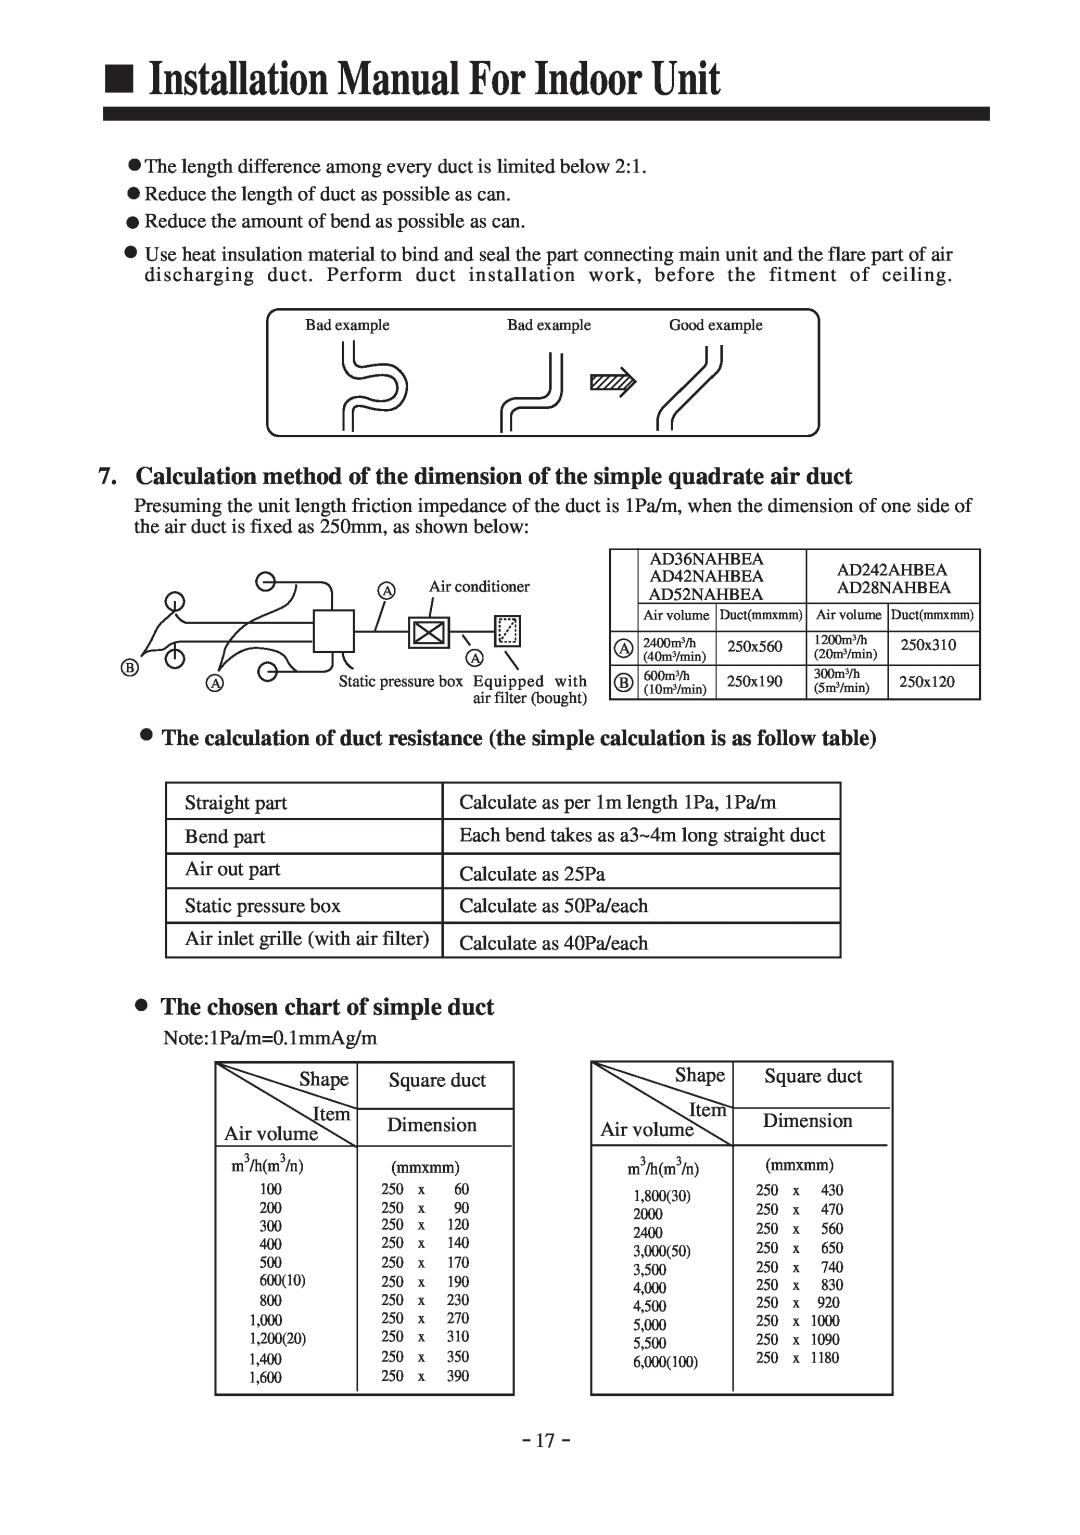 Haier AD42NAHBEA, AD242AHBEA, AD52NAHBEA, AD36NAHBEA Installation Manual For Indoor Unit, The chosen chart of simple duct 